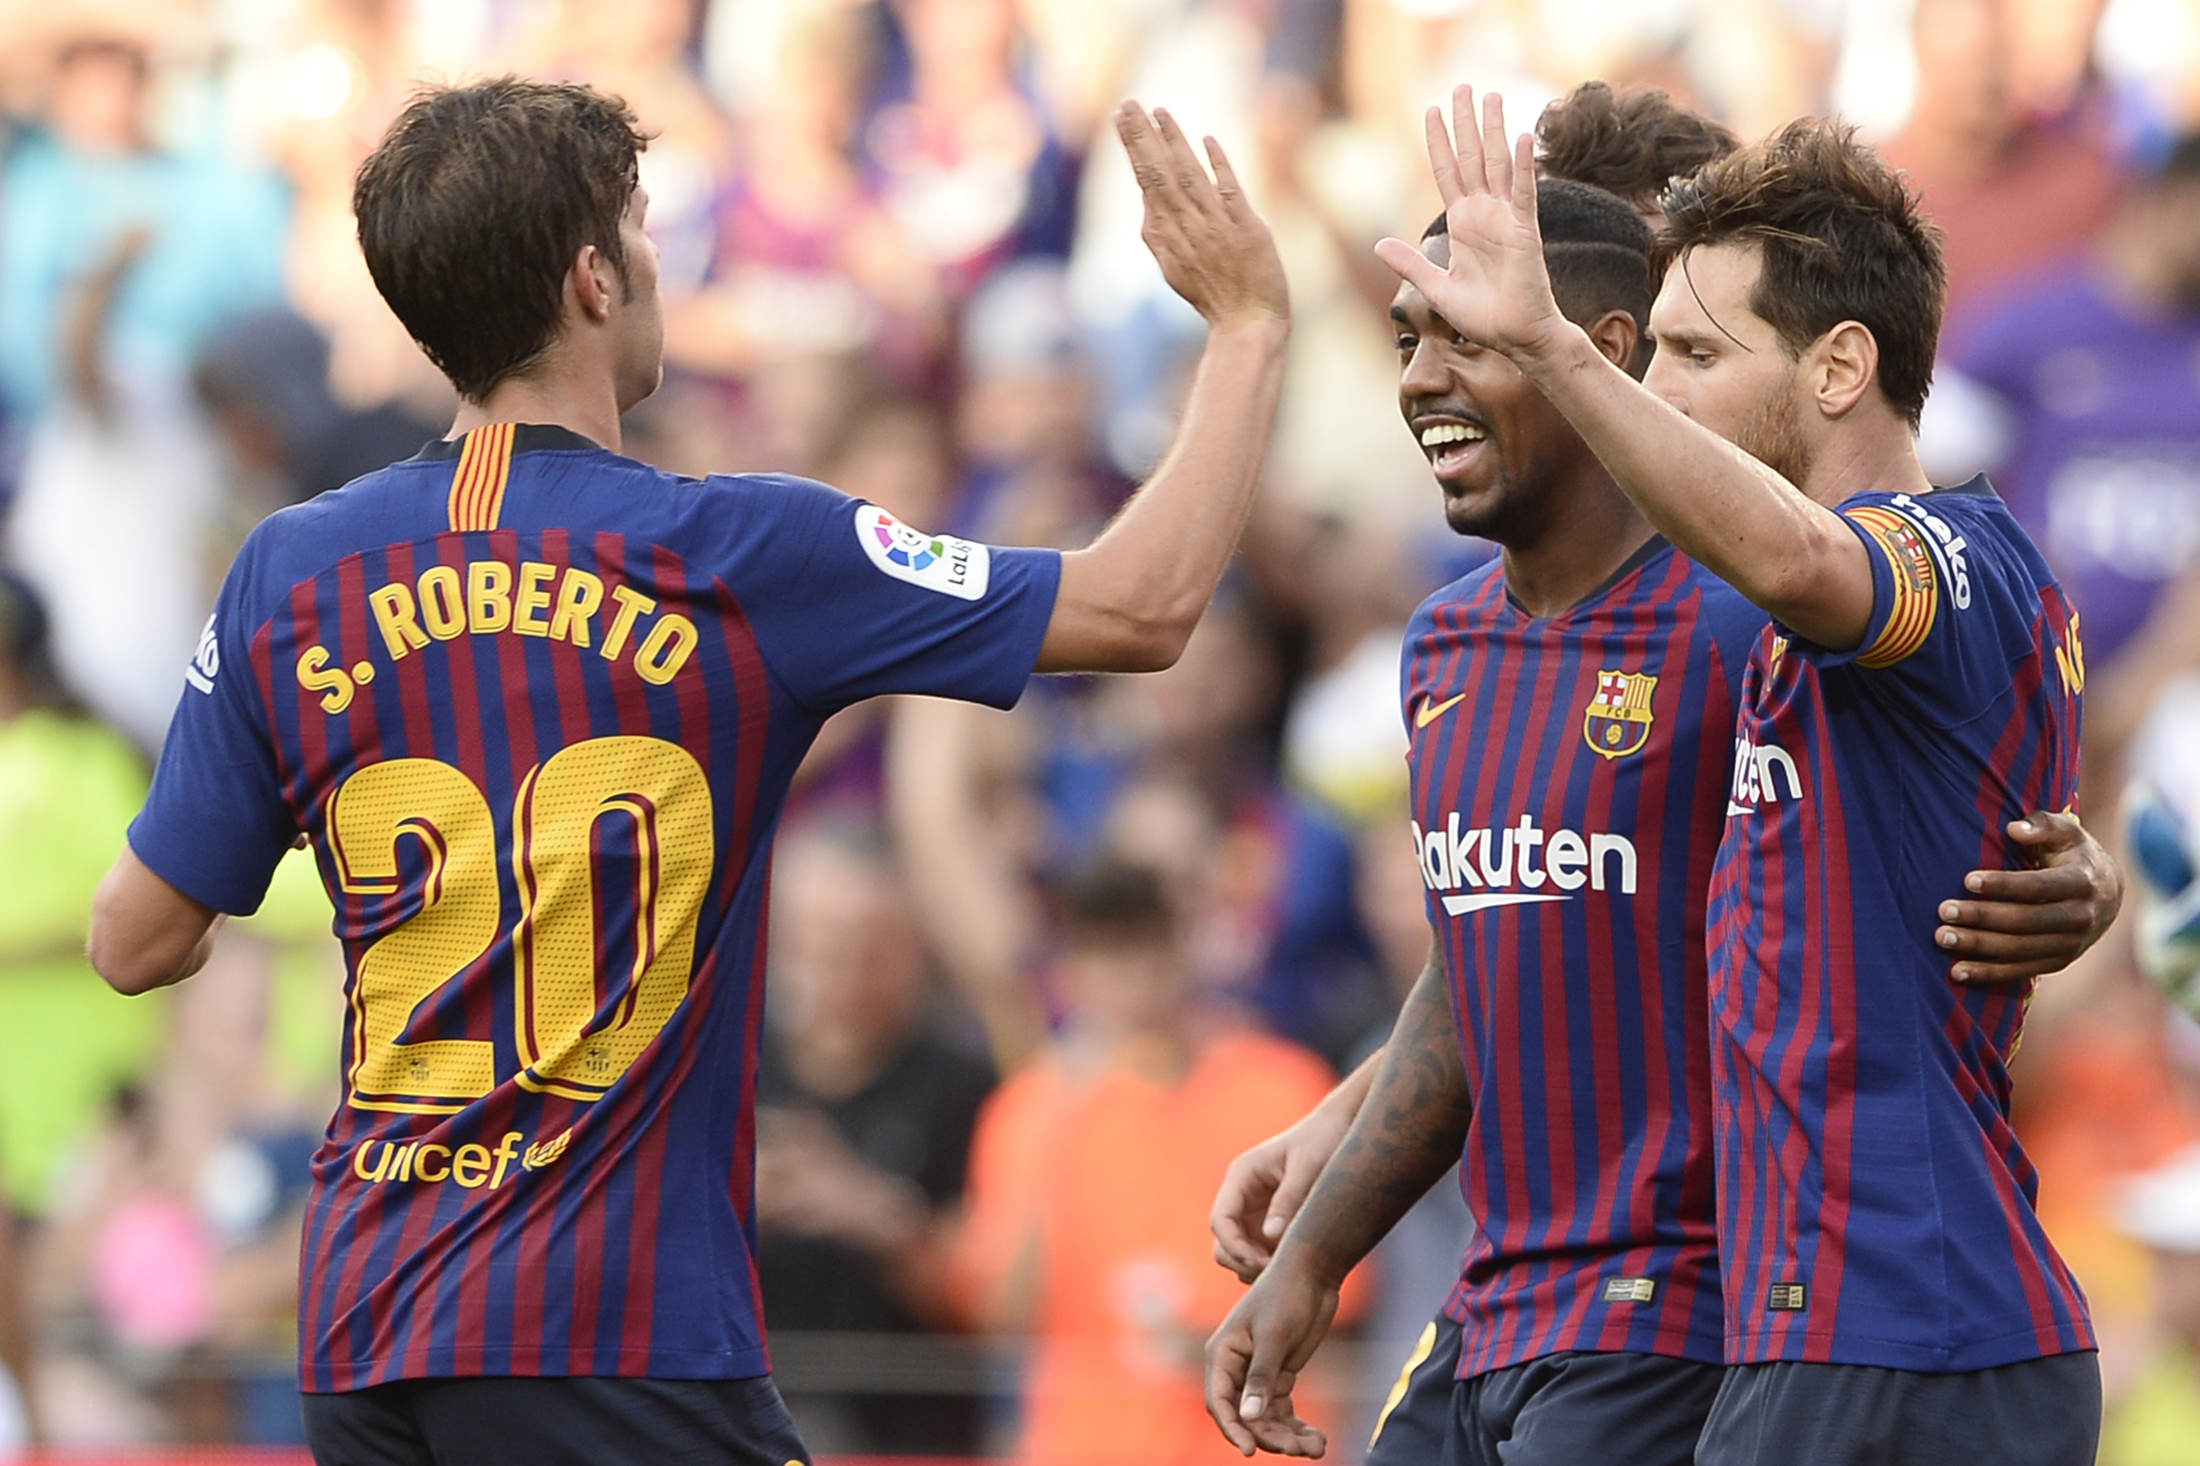 Barcelona's Argentinian forward Lionel Messi (R) celebrates with Barcelona's Spanish midfielder Sergi Roberto (L) and Barcelona's Brazilian midfielder Malcom (C) after scoring a goal during the 53rd Joan Gamper Trophy friendly football match between Barcelona and Boca Juniors at the Camp Nou stadium in Barcelona on August 15, 2018. (Photo by Josep LAGO / AFP)        (Photo credit should read JOSEP LAGO/AFP/Getty Images)